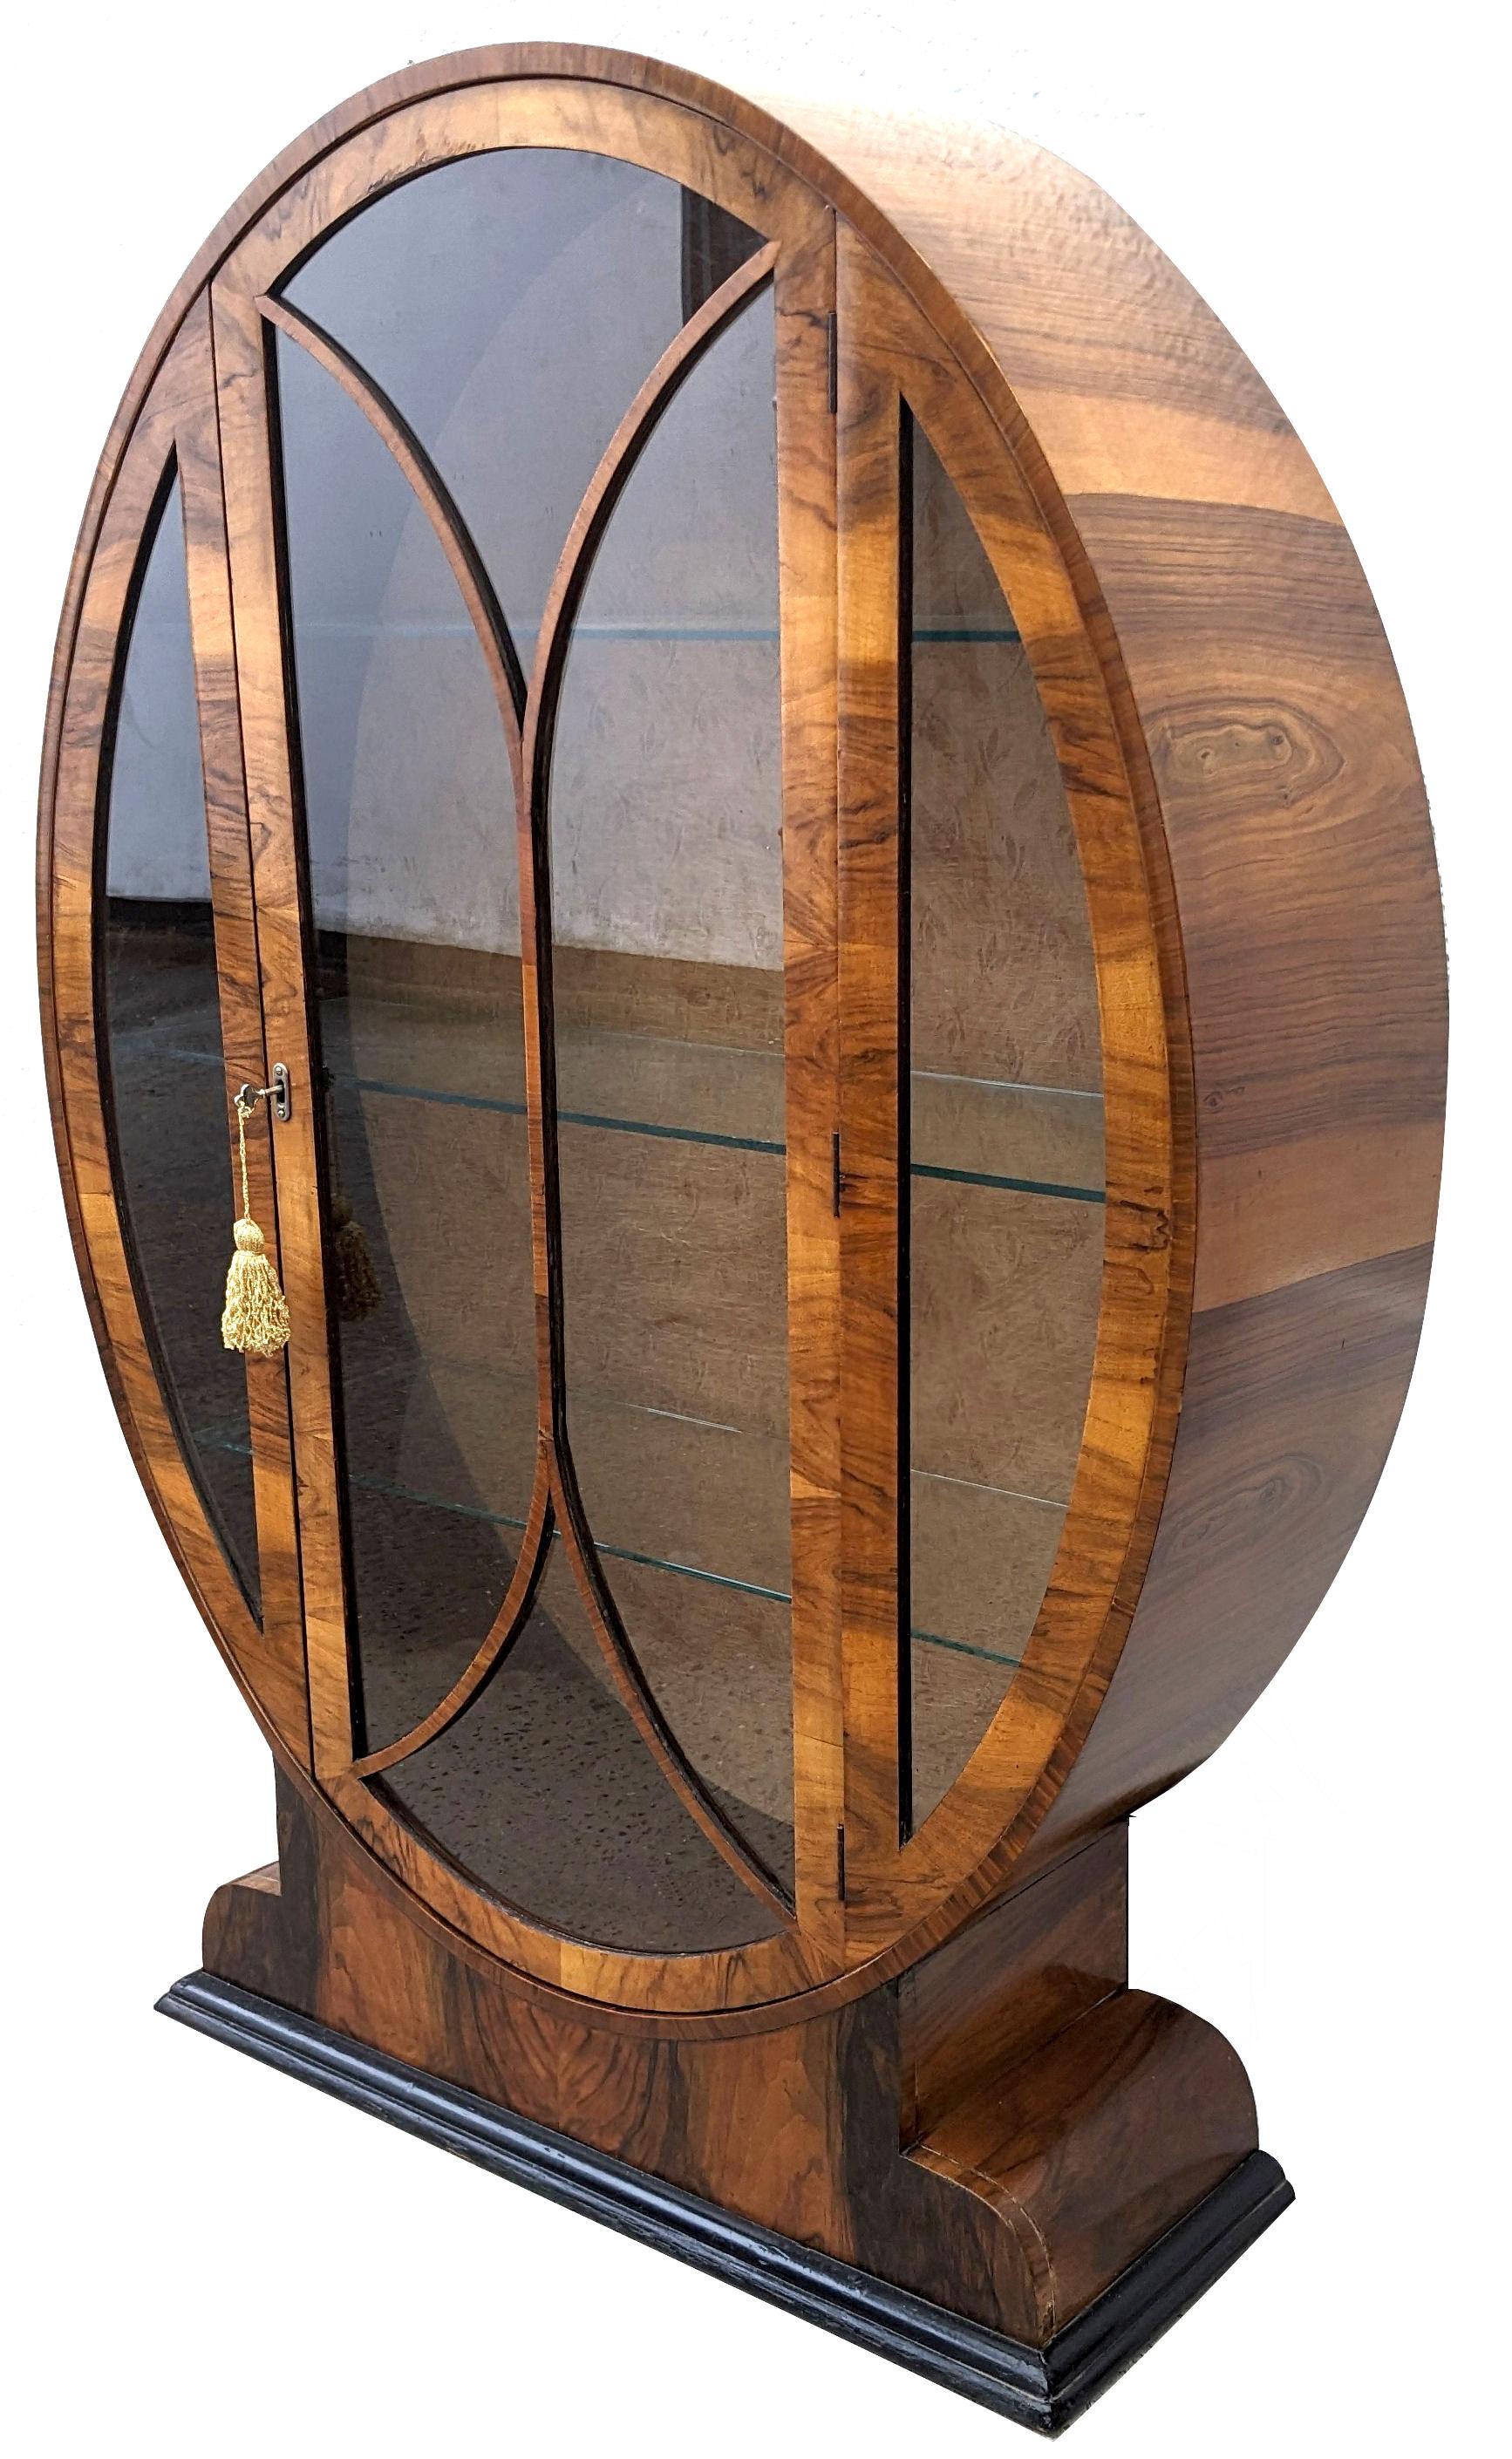 Very rare example of what is considered one of the more rare Art Deco display cabinets is this oval shaped heavily figured walnut veneered example. Fabulous piece of furniture, it truly is. Original silk lining as backing, shows some signs of age